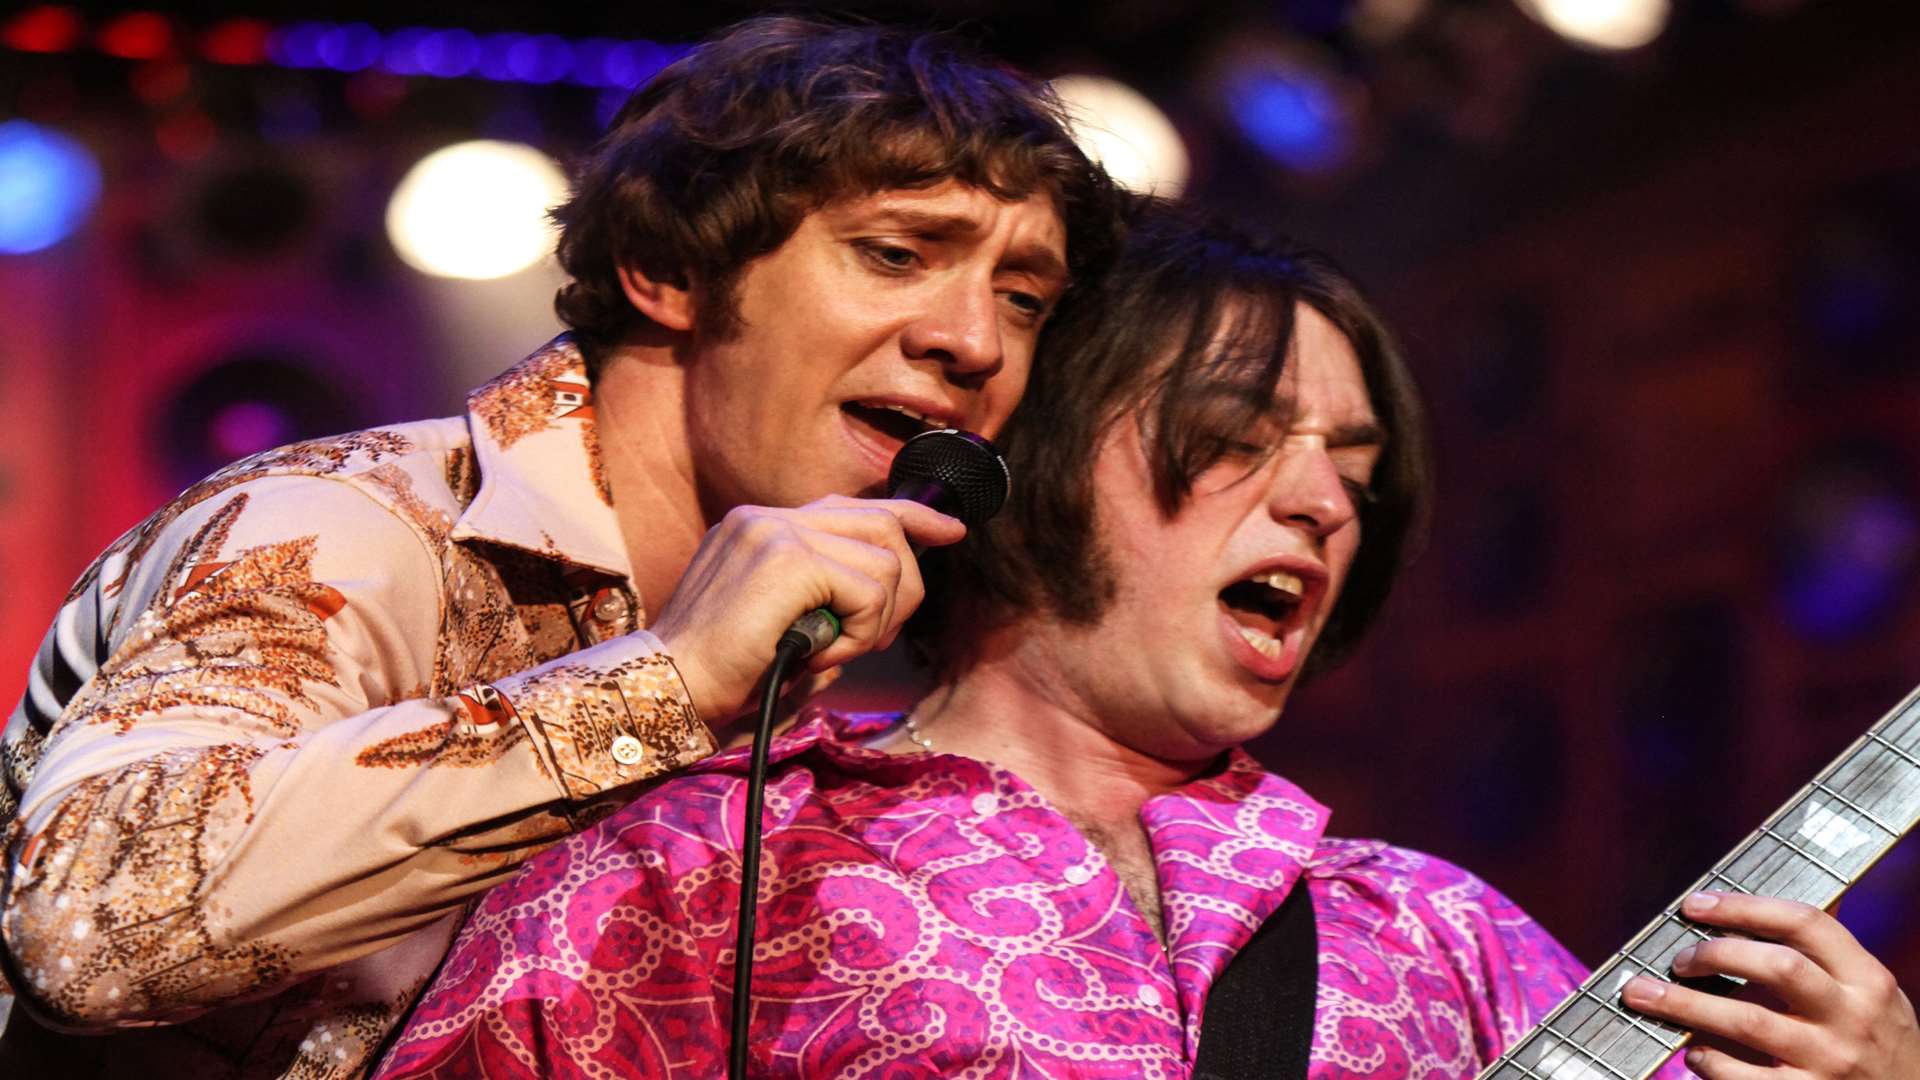 Ryan O'Donnell (Ray Davies) and Mark Newnham (Dave Davies) in the Kinks musical